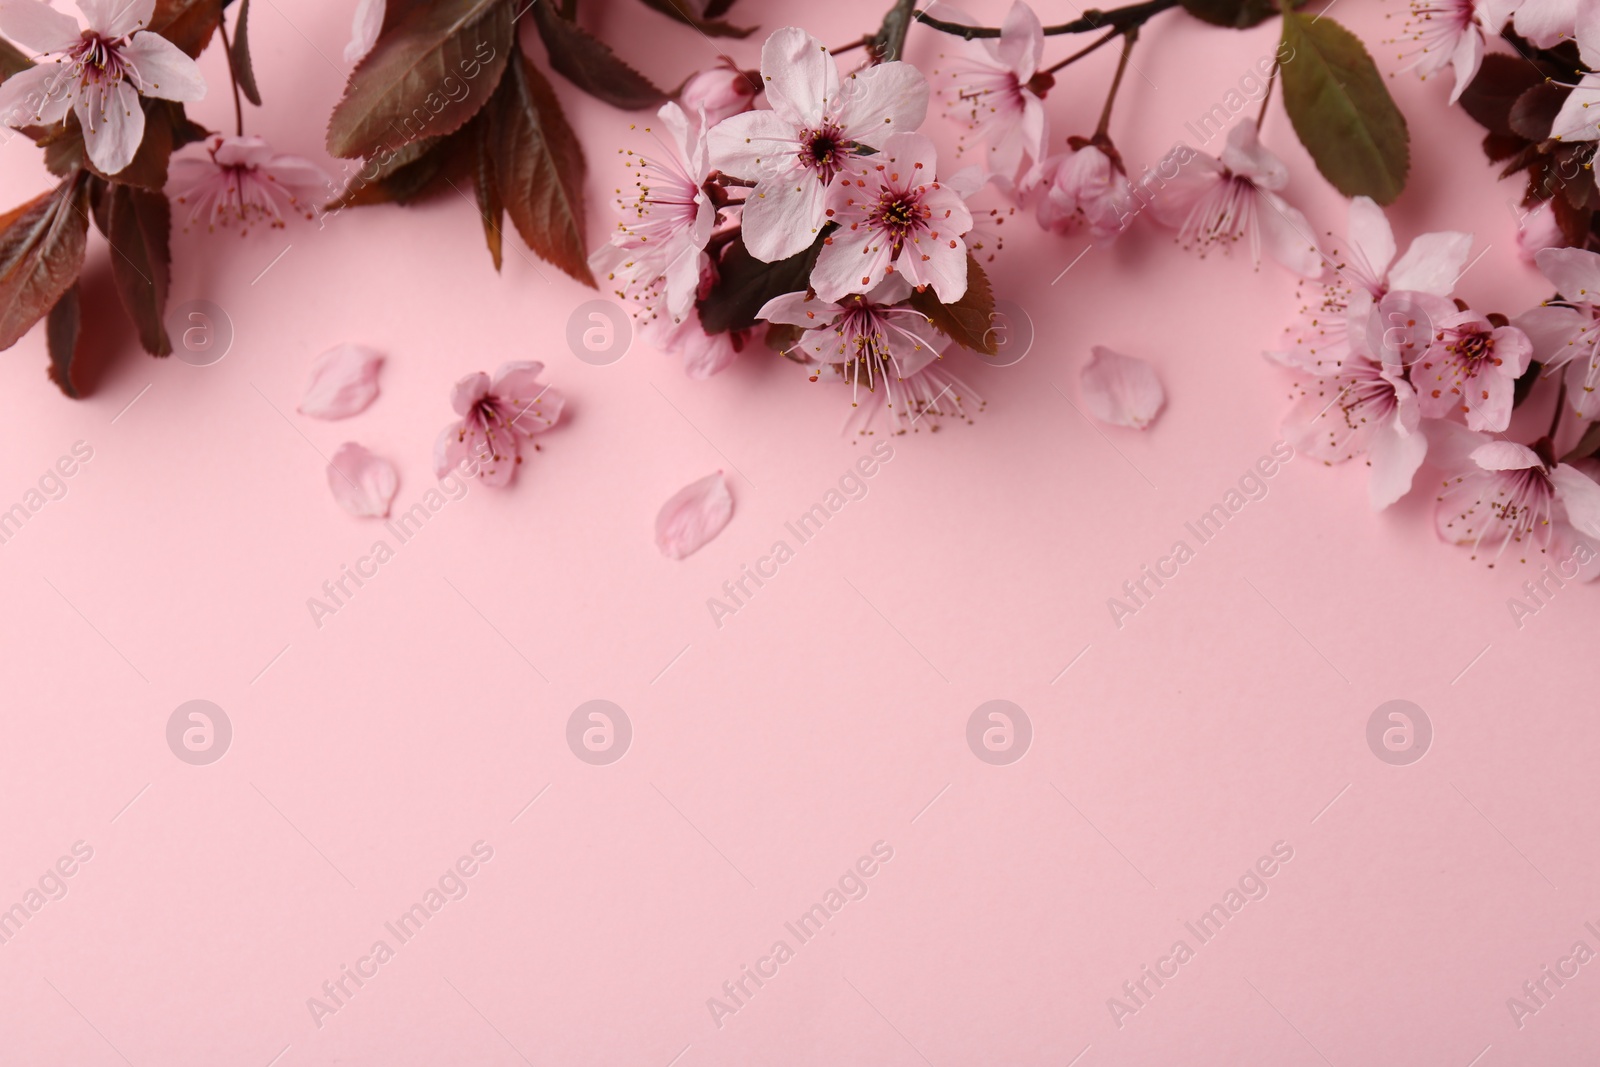 Photo of Spring tree branches with beautiful blossoms on pink background, top view. Space for text